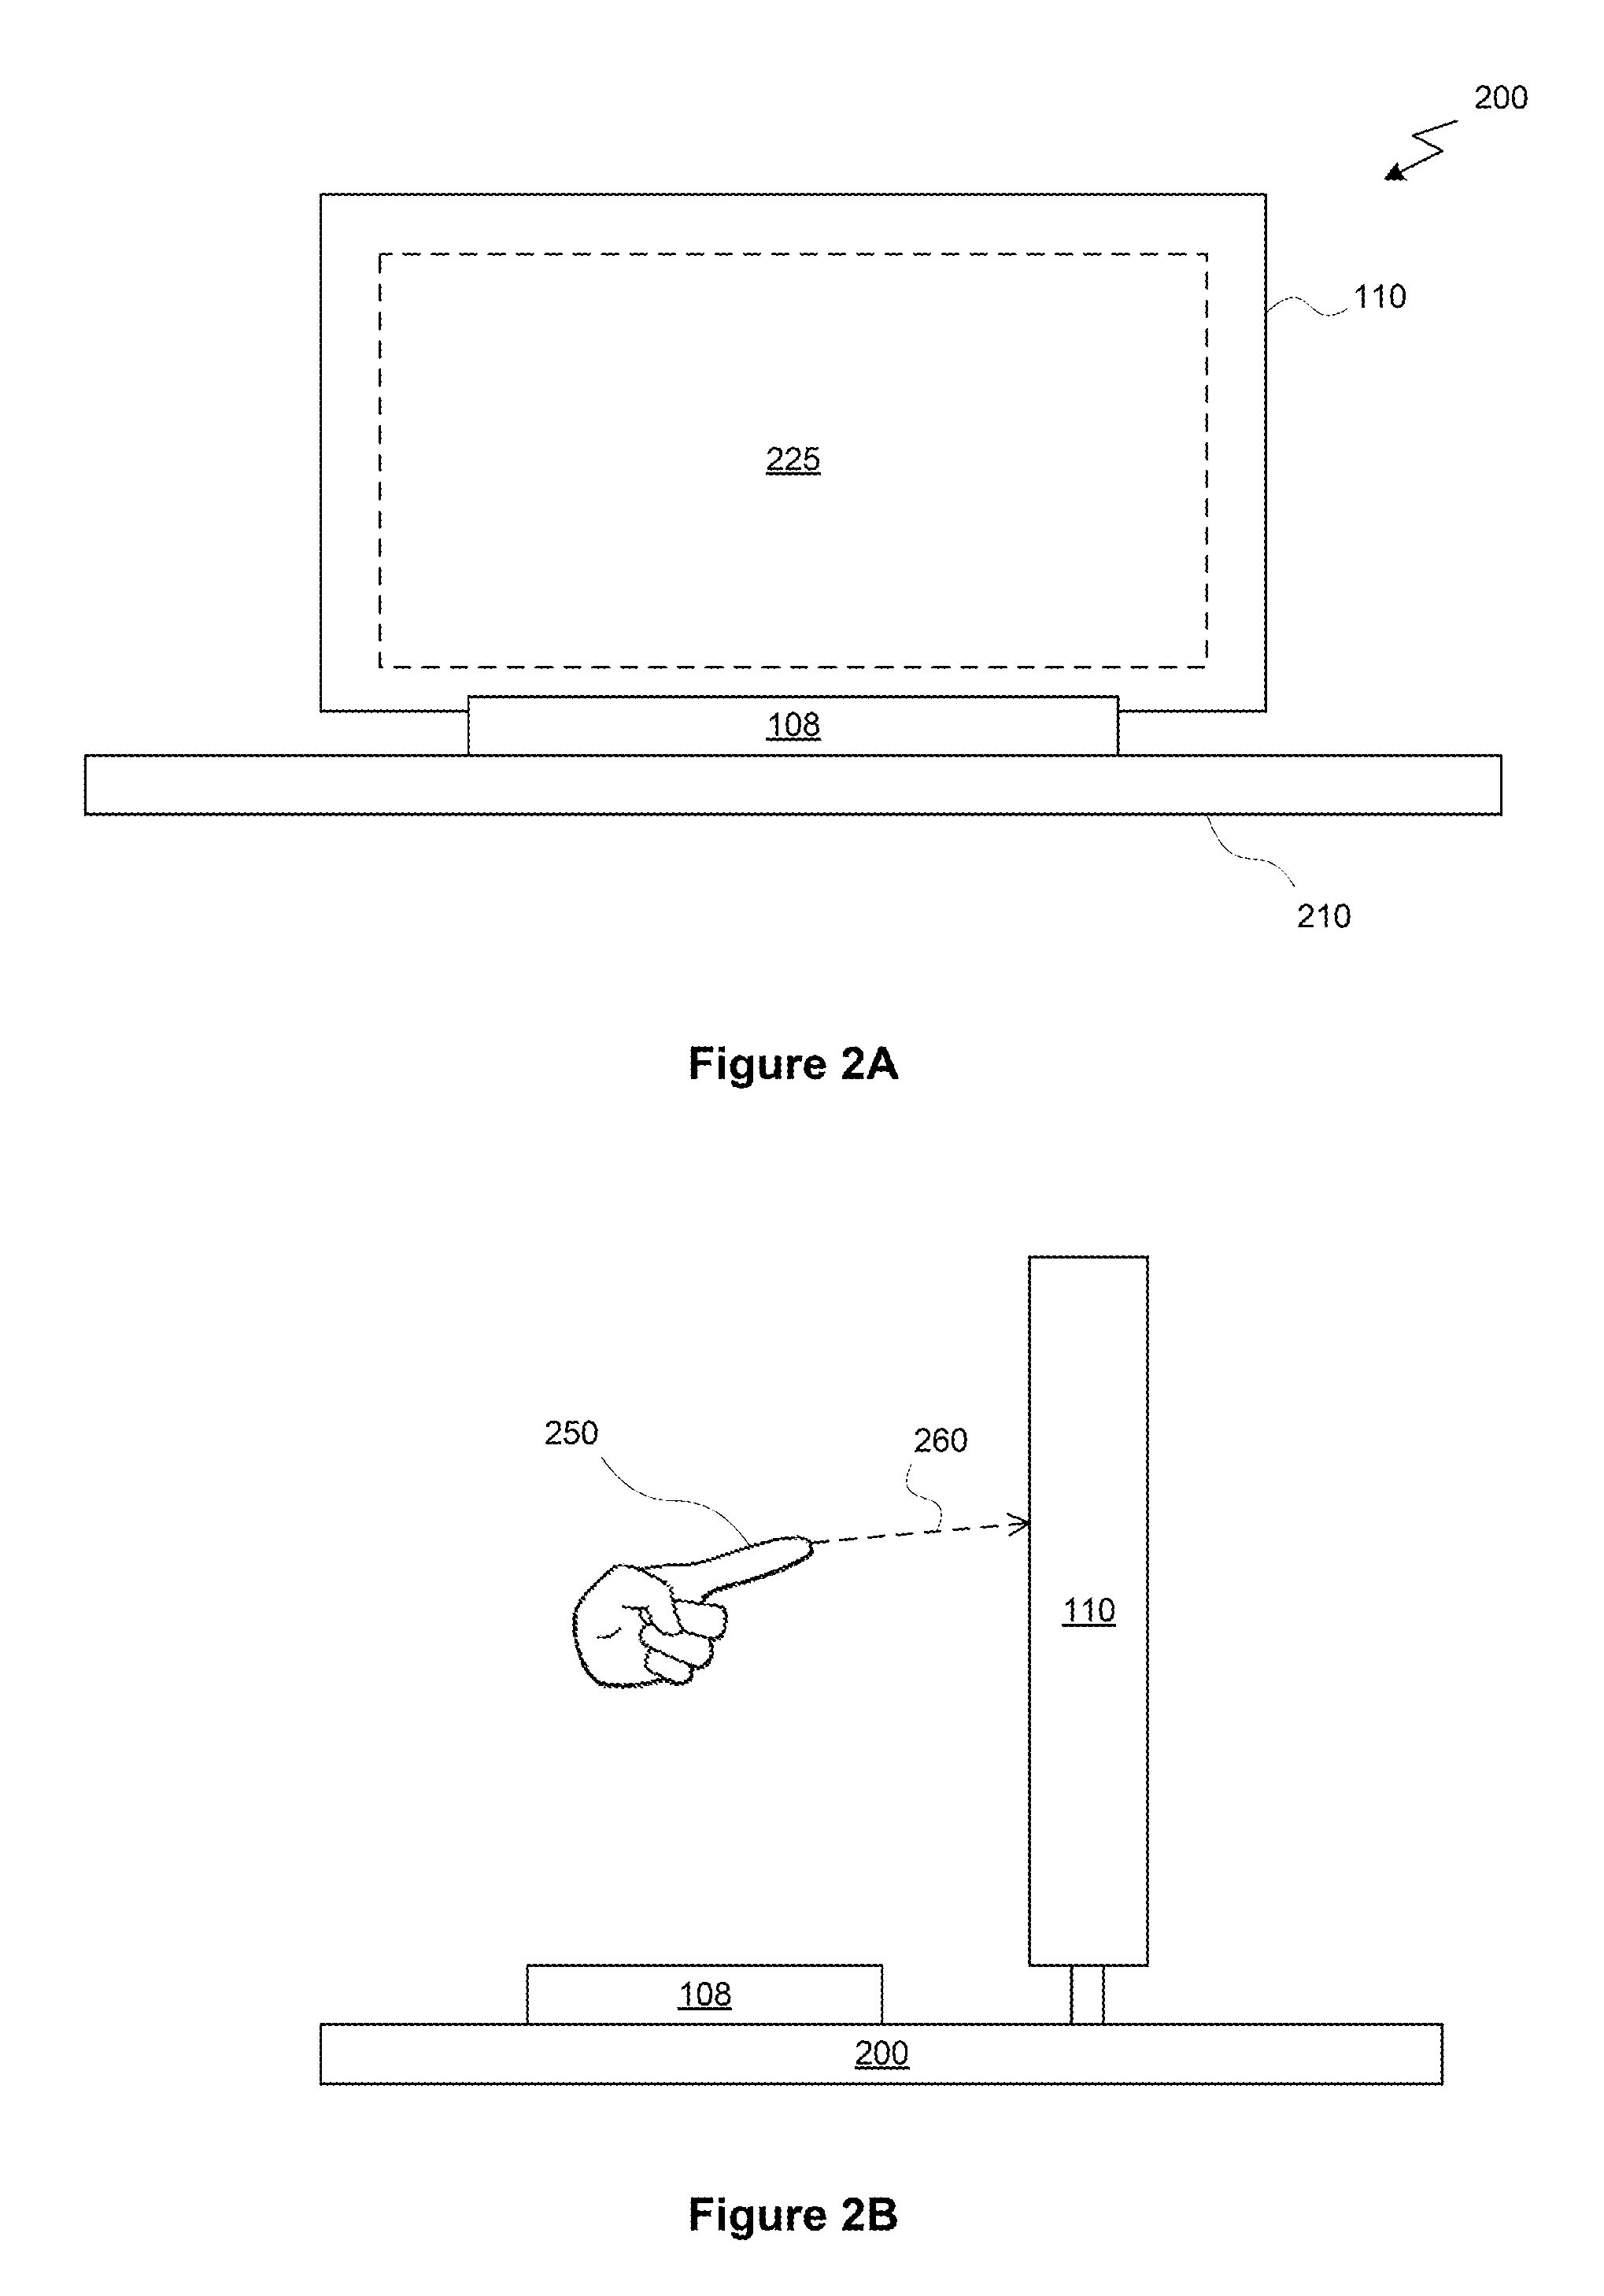 Enhanced target selection for a touch-based input enabled user interface